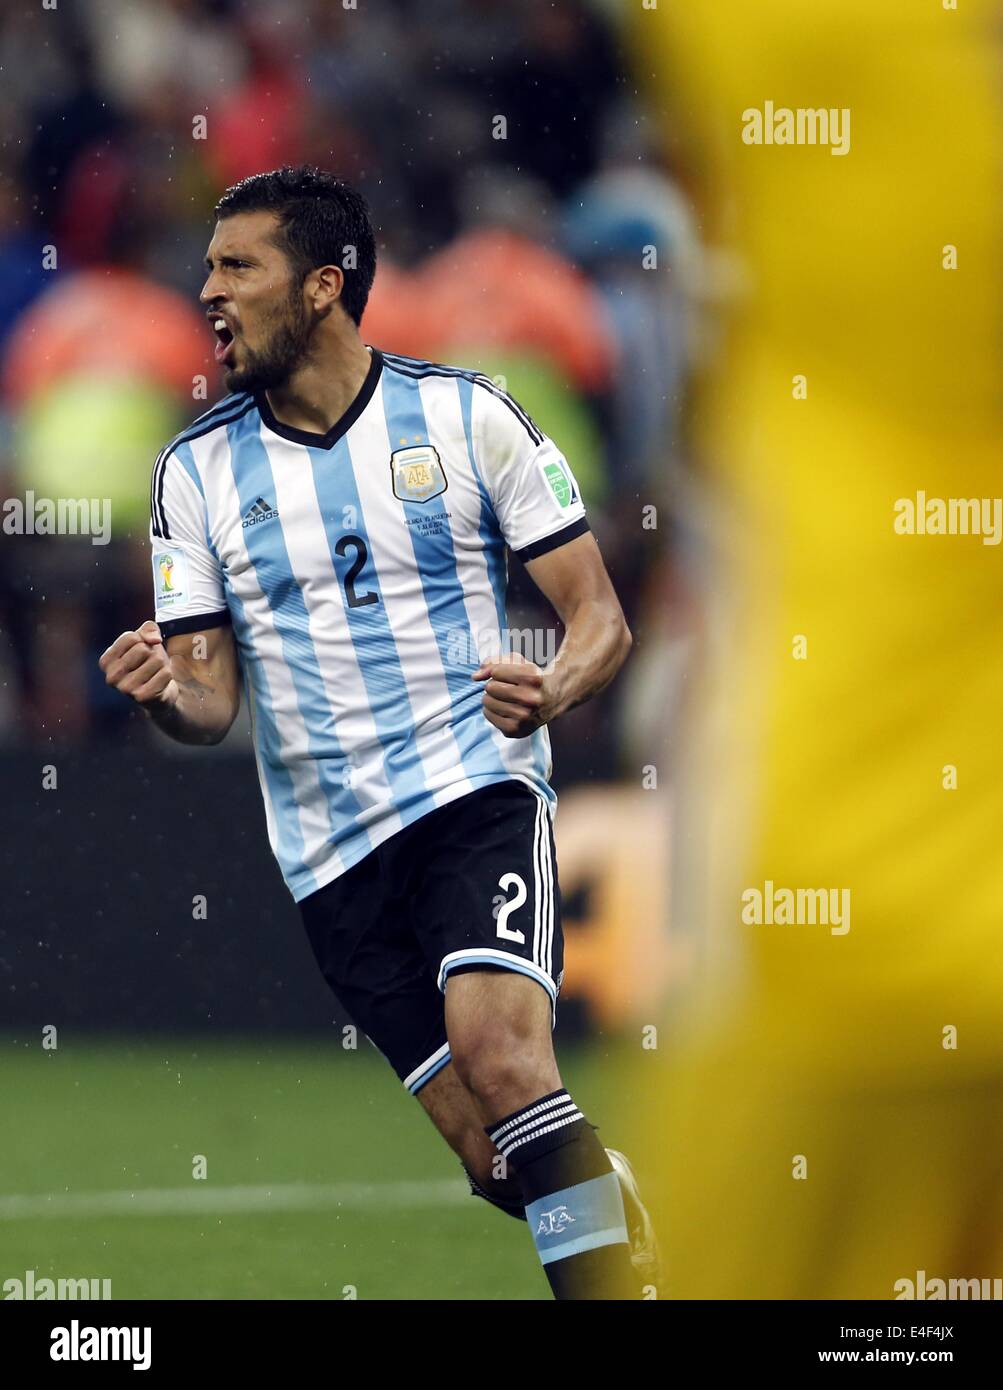 Sao Paulo, Brazil. 9th July, 2014. Argentina's Ezequiel Garay celebrates after scoring in the penalty shoot-out during a semifinal match between Netherlands and Argentina of 2014 FIFA World Cup at the Arena de Sao Paulo Stadium in Sao Paulo, Brazil, on July 9, 2014. Argentina won 4-2 on penalties over Netherlands after a 0-0 tie and qualified for the final on Wednesday. Credit:  Wang Lili/Xinhua/Alamy Live News Stock Photo